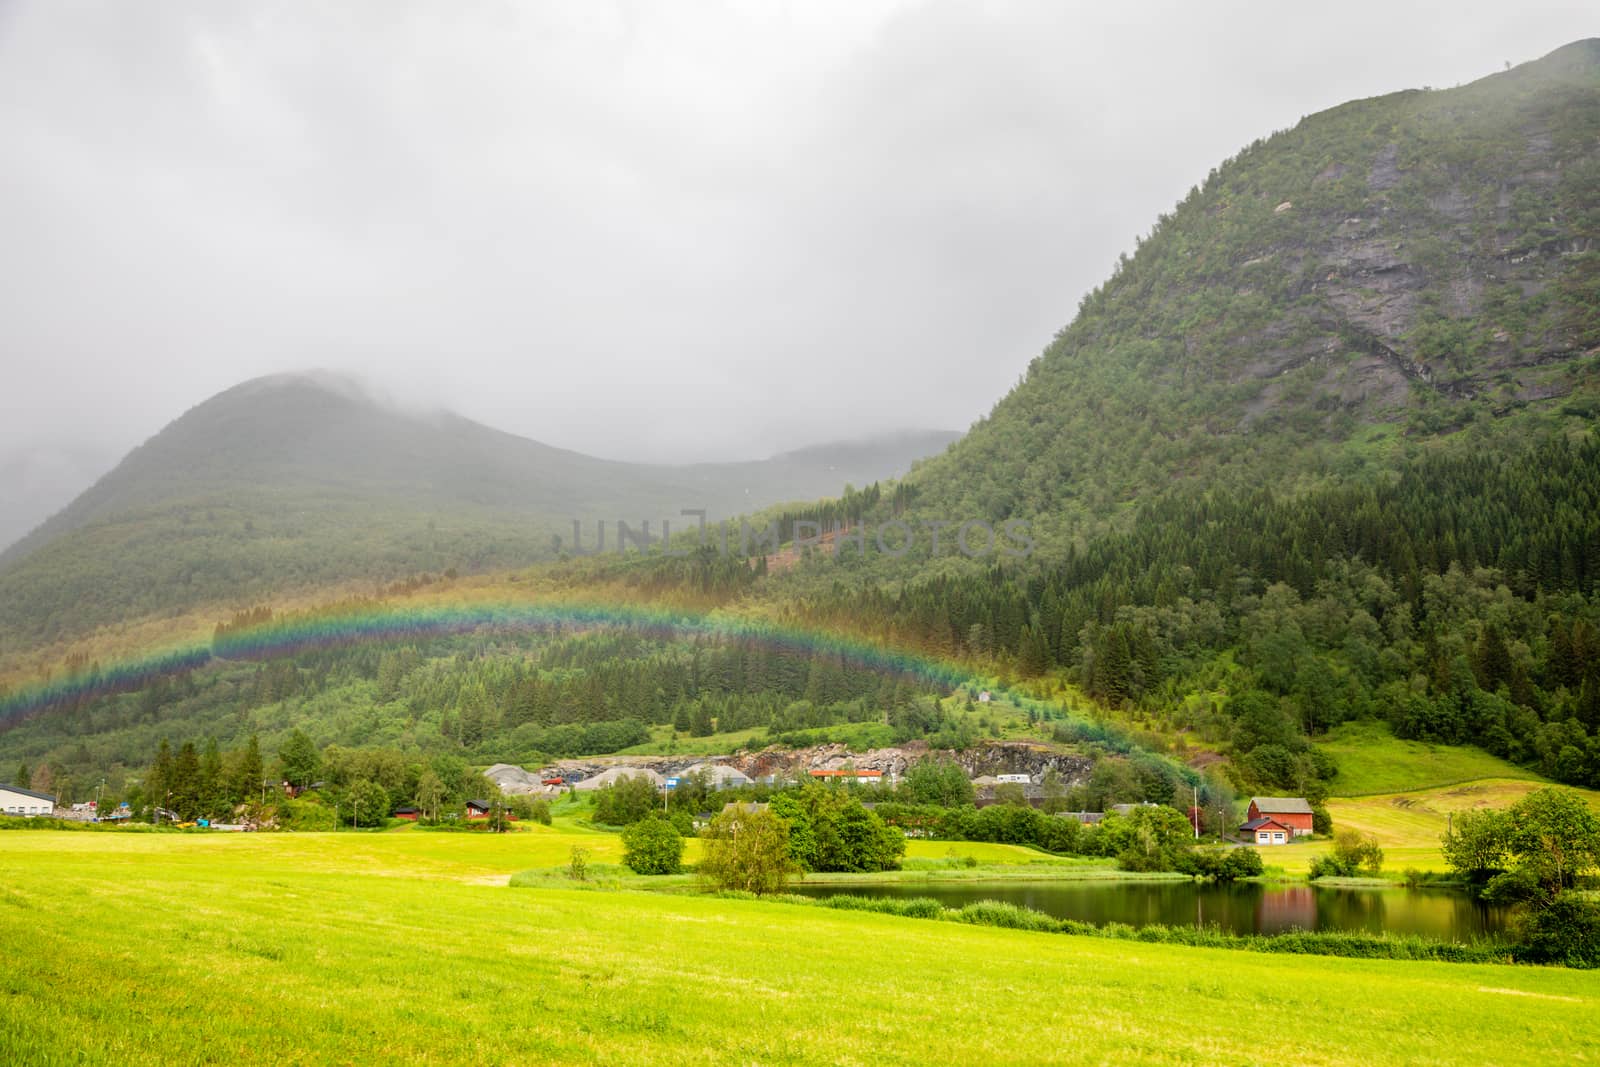 Colorful rainbow over the fields, lake and houses of Skei village, Jølster in Sogn og Fjordane county, Norway.